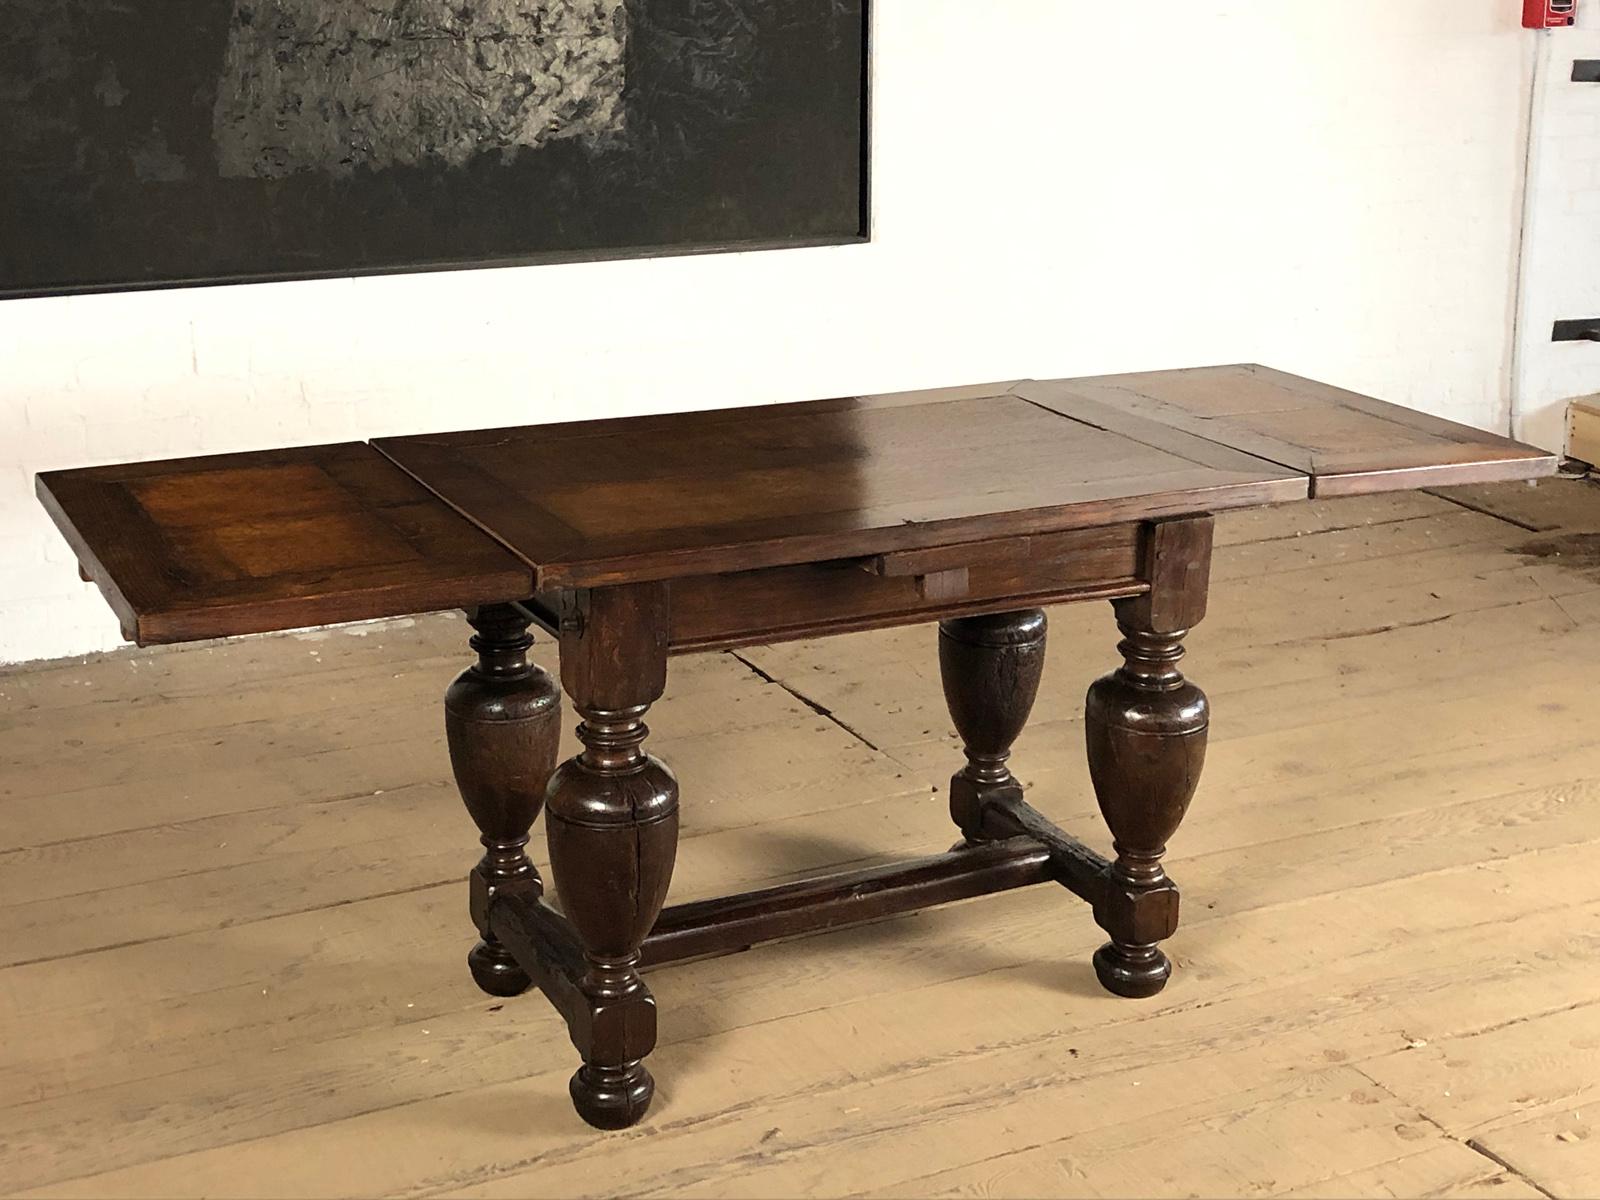 The small Dutch Baroque draw-leaf or center table with a two-board framed top having conforming extension leaves on each end, above a plain frieze, supported by massive plaint turned elongated 